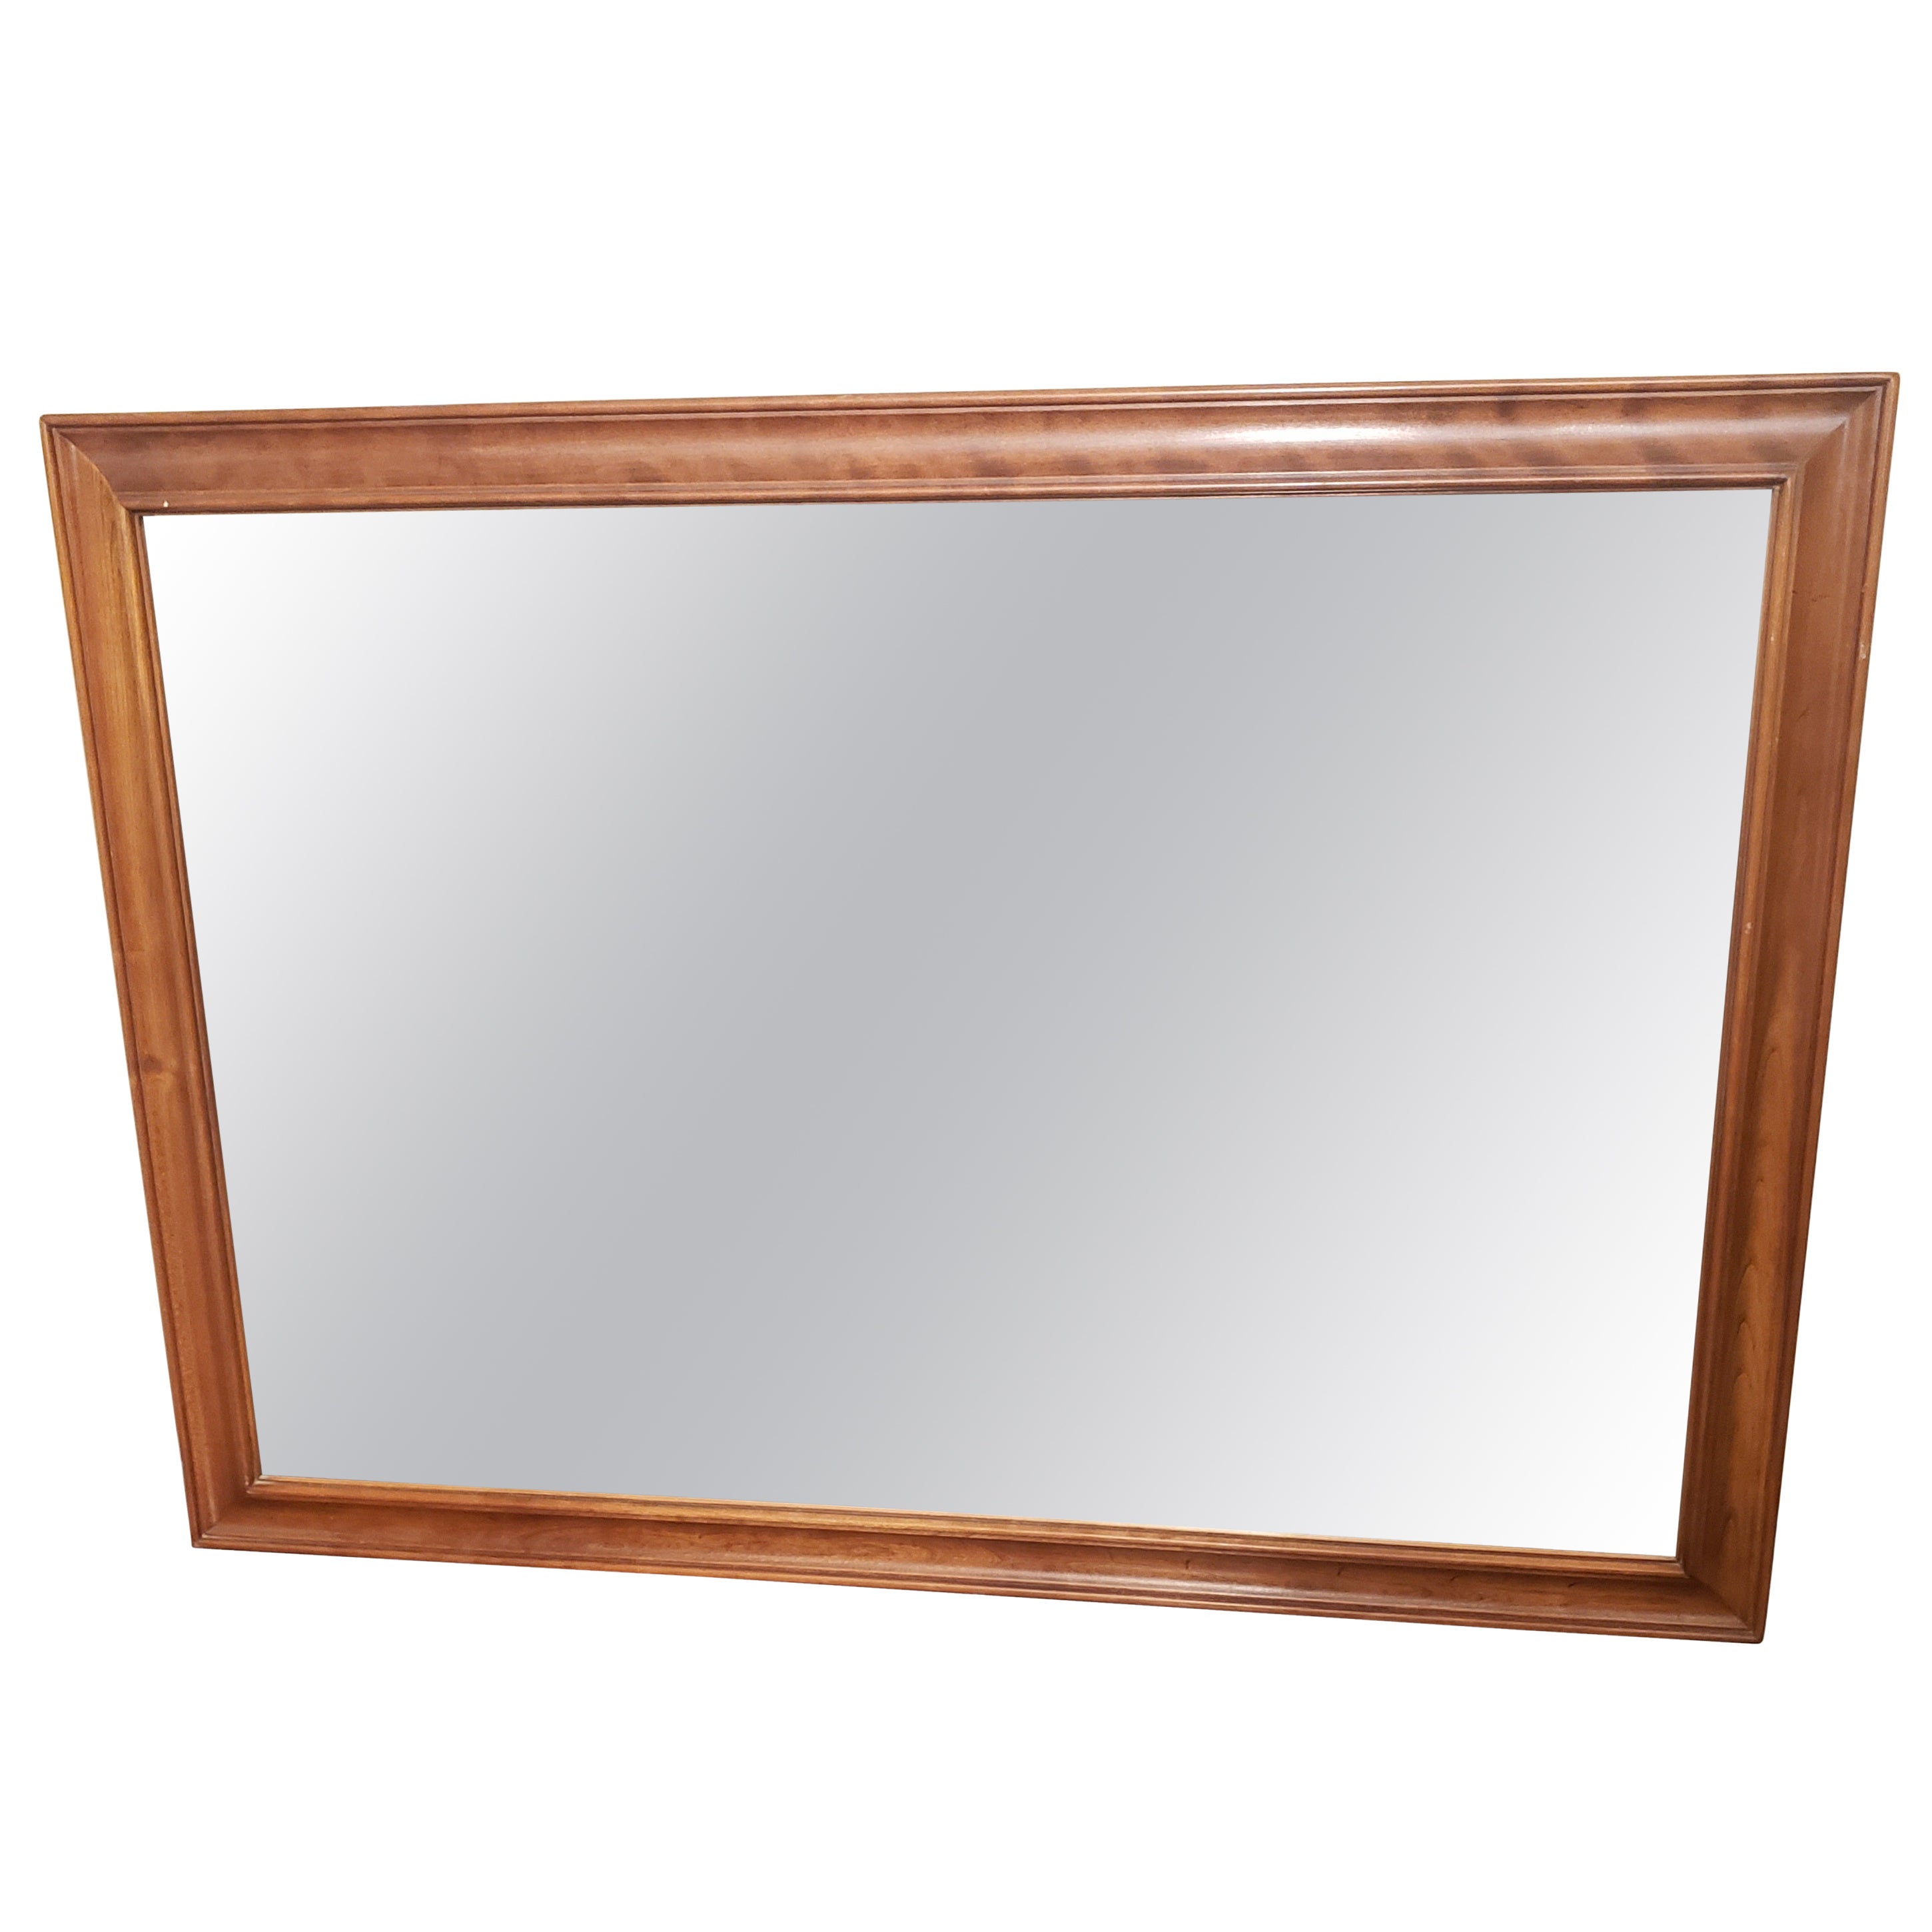 L&JG Stickley and John a Colby and Sons Solid Cherry Mirror, circa 1890s For Sale